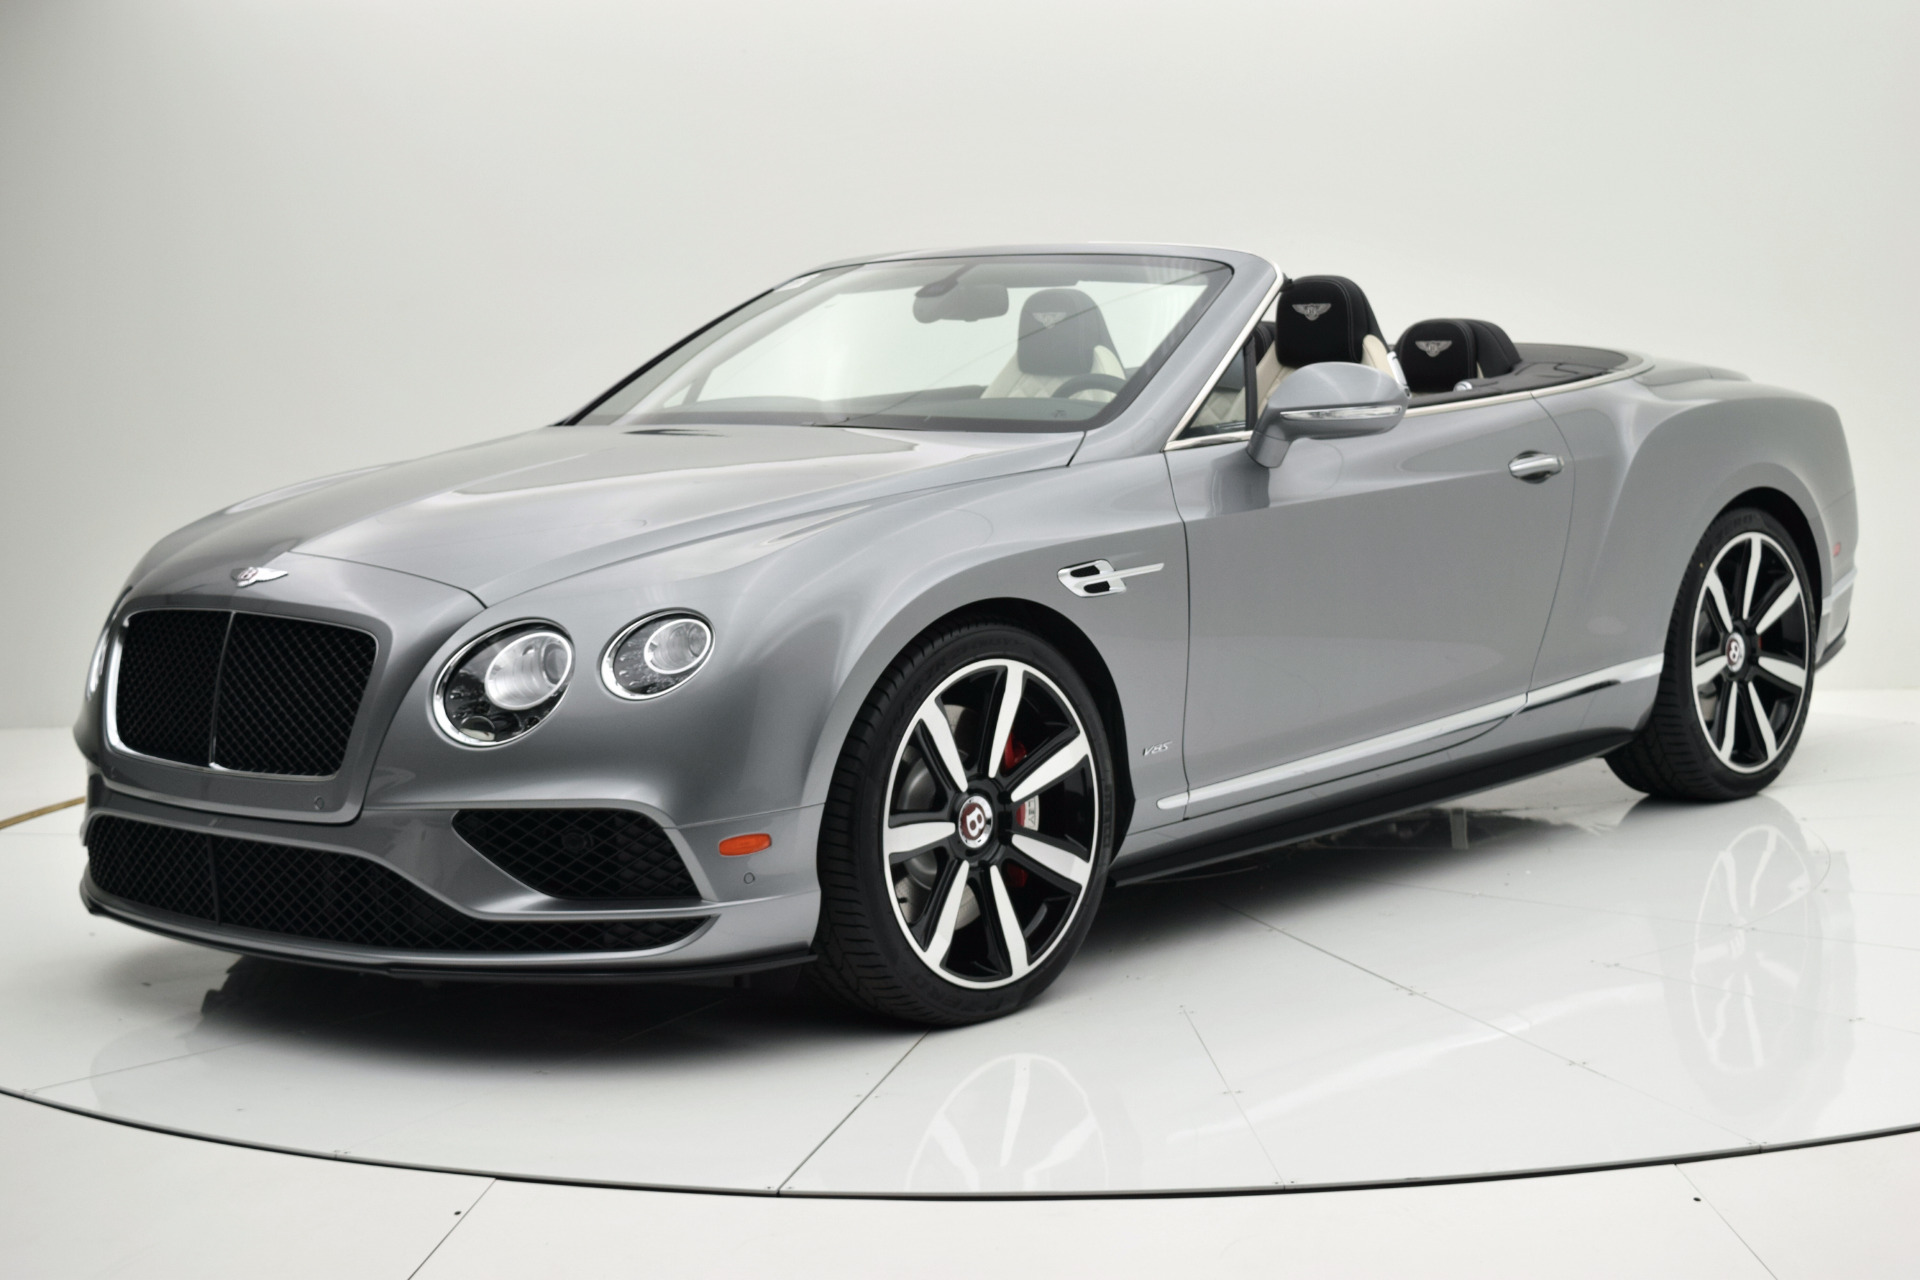 Used 2016 Bentley Continental GT V8 S Convertible for sale Sold at Bentley Palmyra N.J. in Palmyra NJ 08065 2